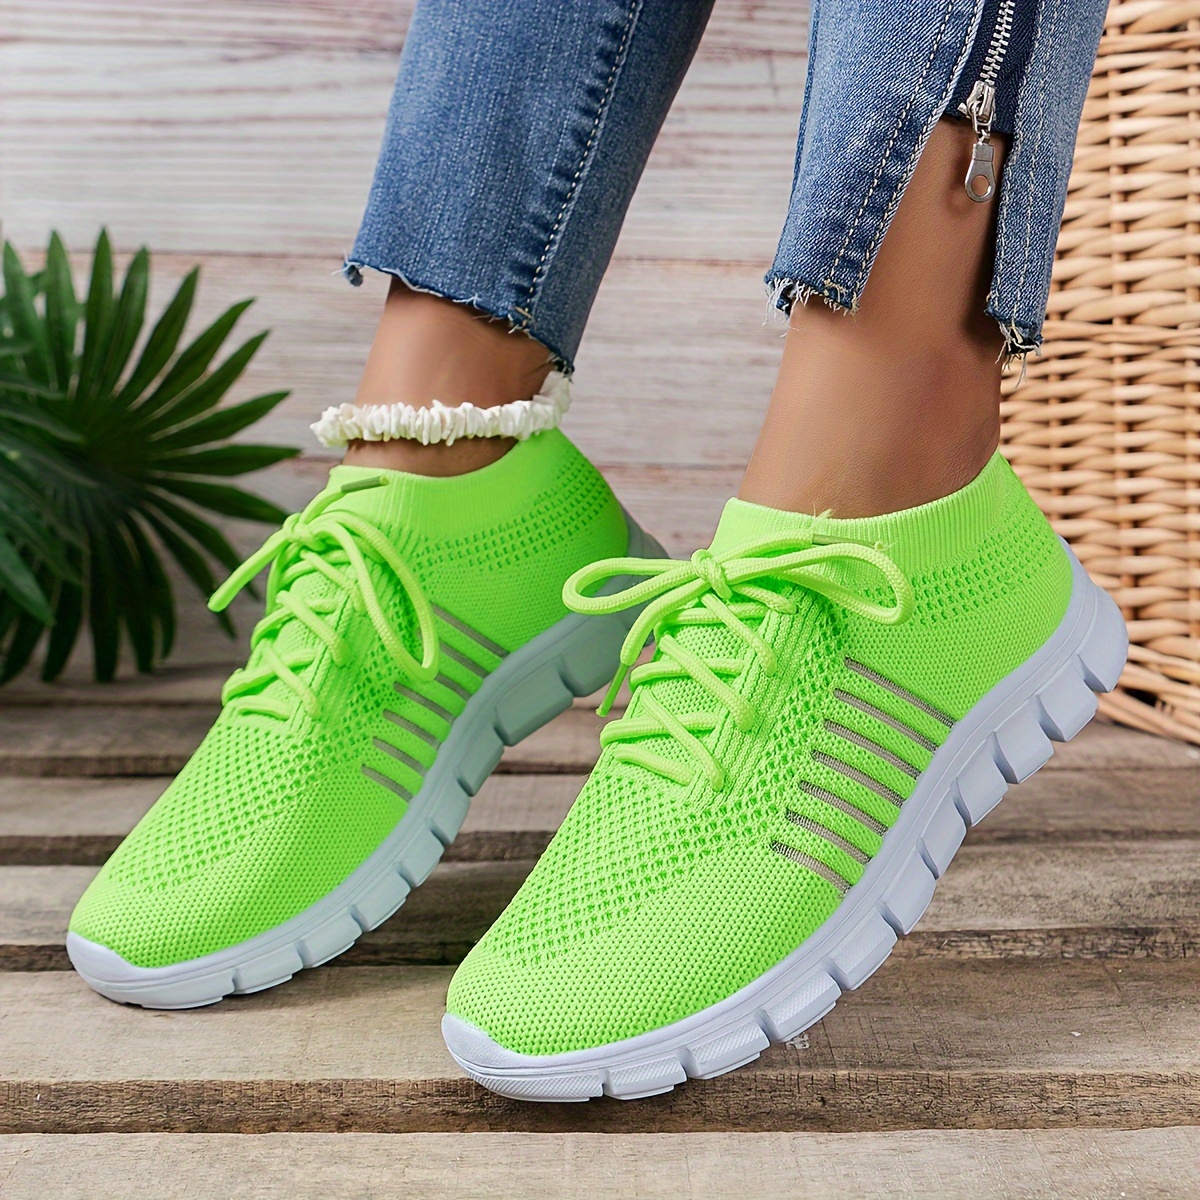 

Women's Lace-up Breathable Mesh Knit Running Shoes, Anti-slip Stylist Casual Sneakers, Outdoor Walking Shoes